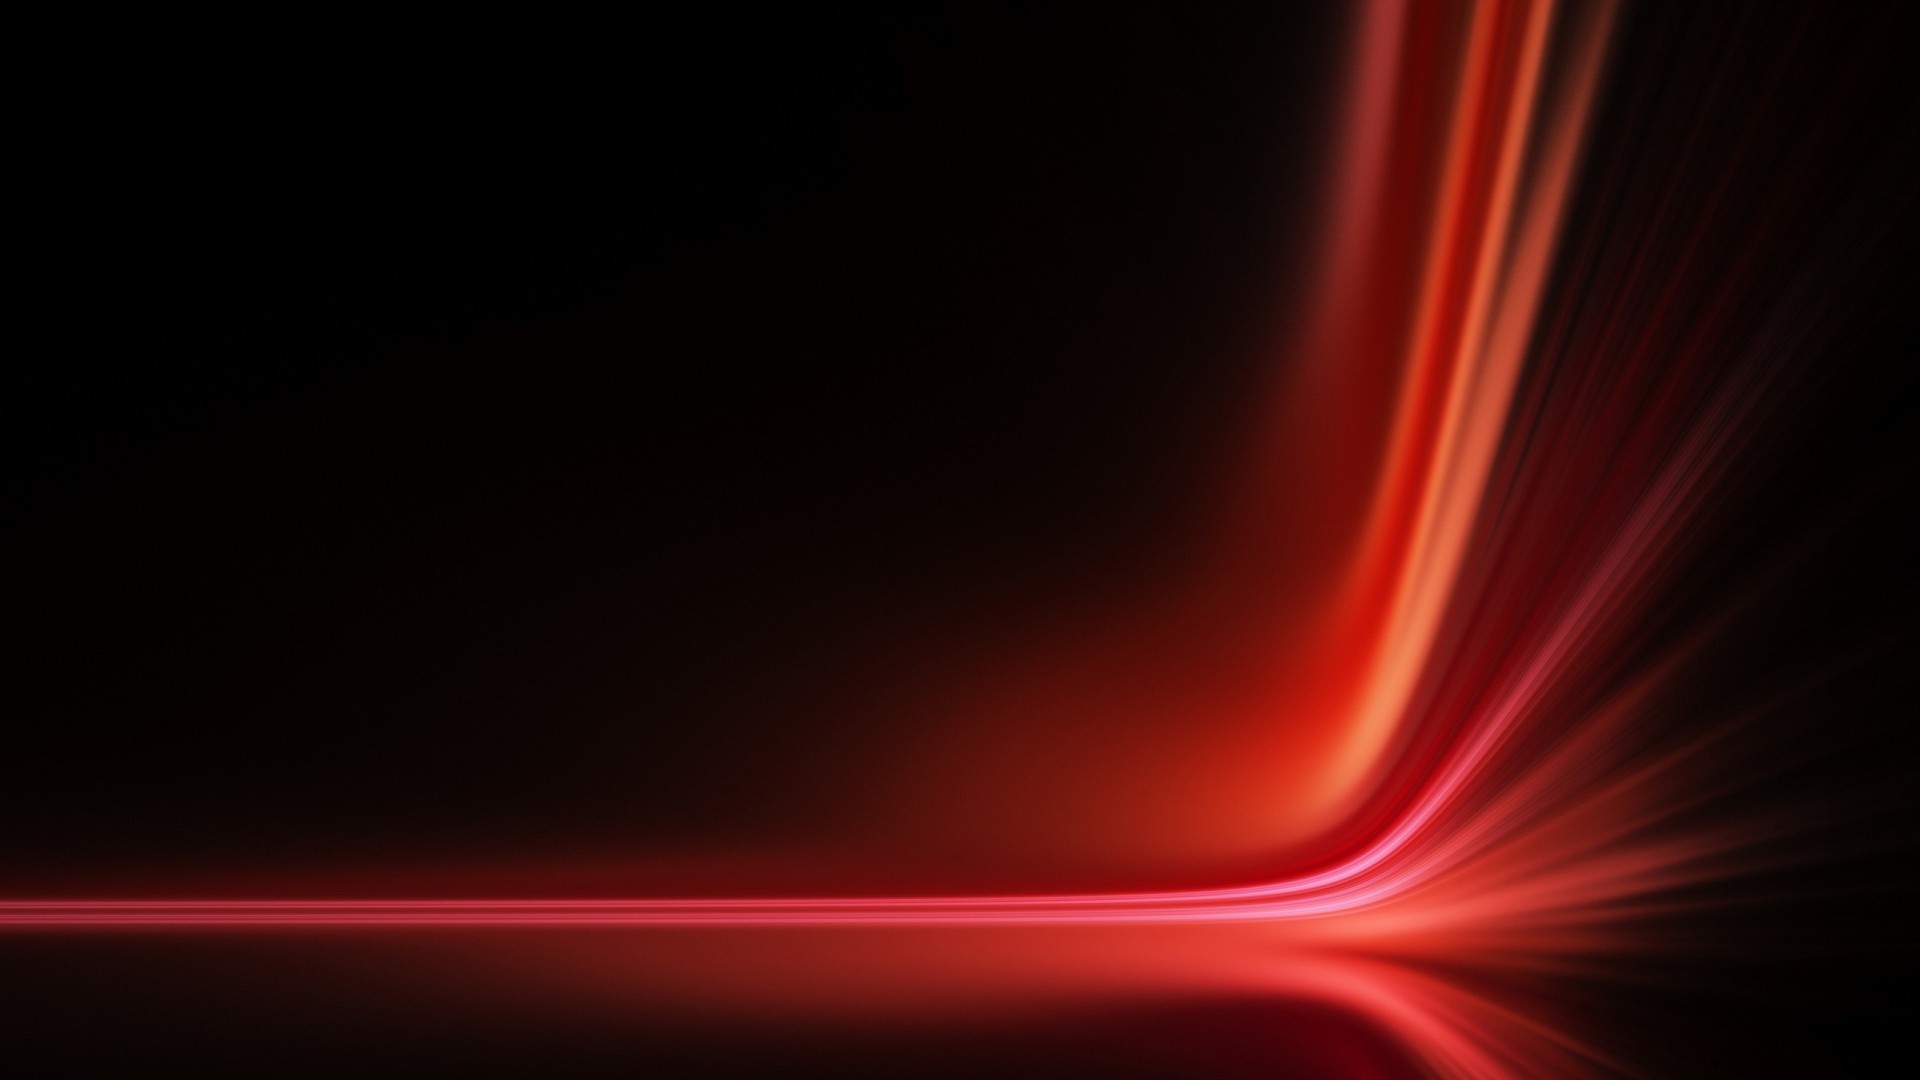 1920x1080 Download Wallpaper Abstract Red Background 1 HD Wallpapers